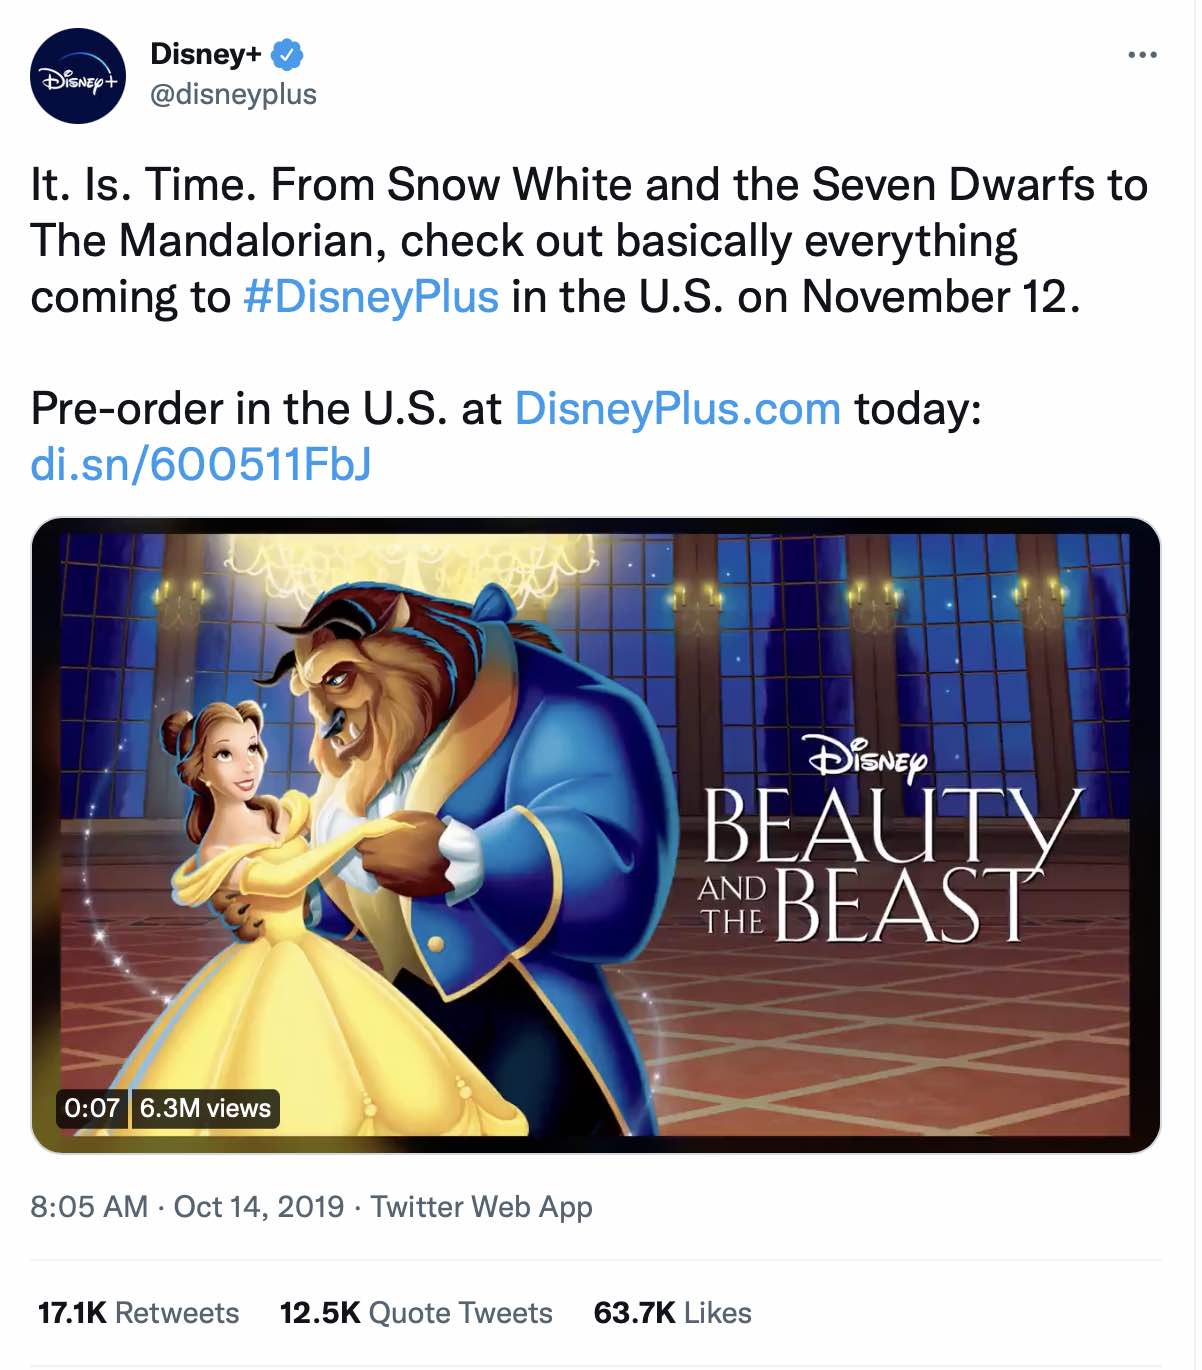 This tweet from Disney + explains the benefits of subscribing: "From Snow White and the Seven Guards to Mandalorez."